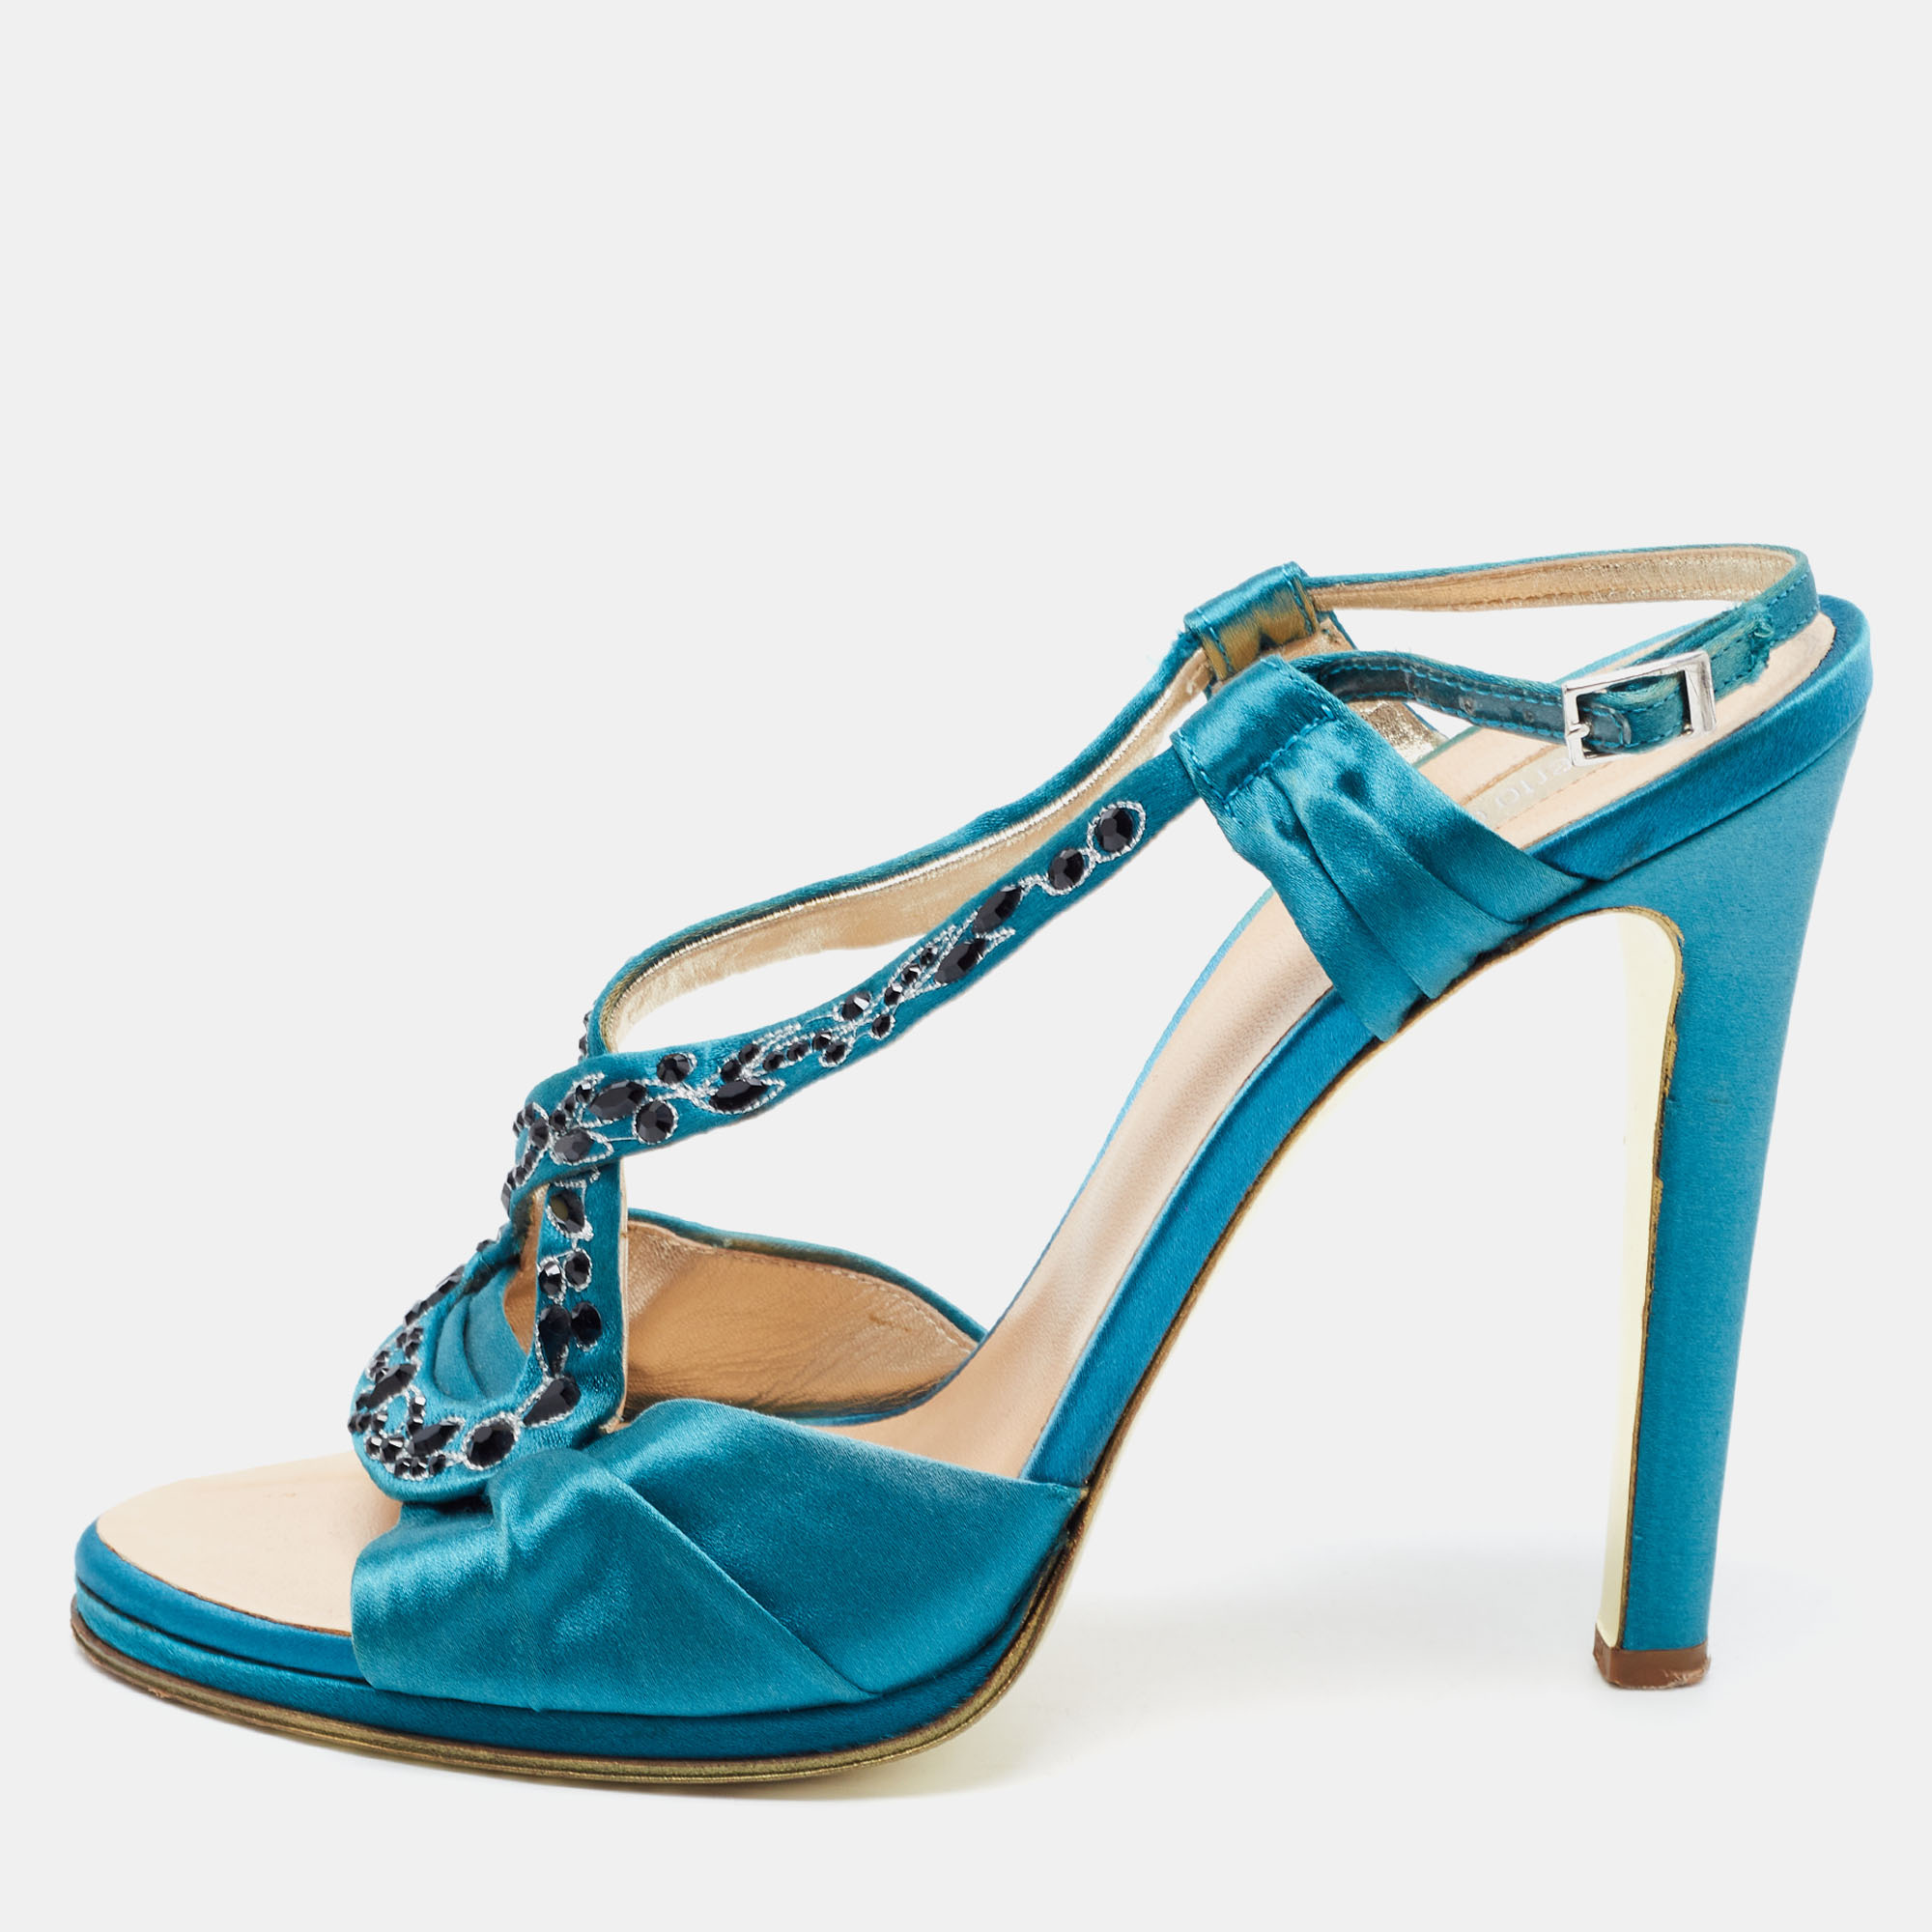 Pre-owned Roberto Cavalli Blue Satin Ankle Strap Sandals Size 39